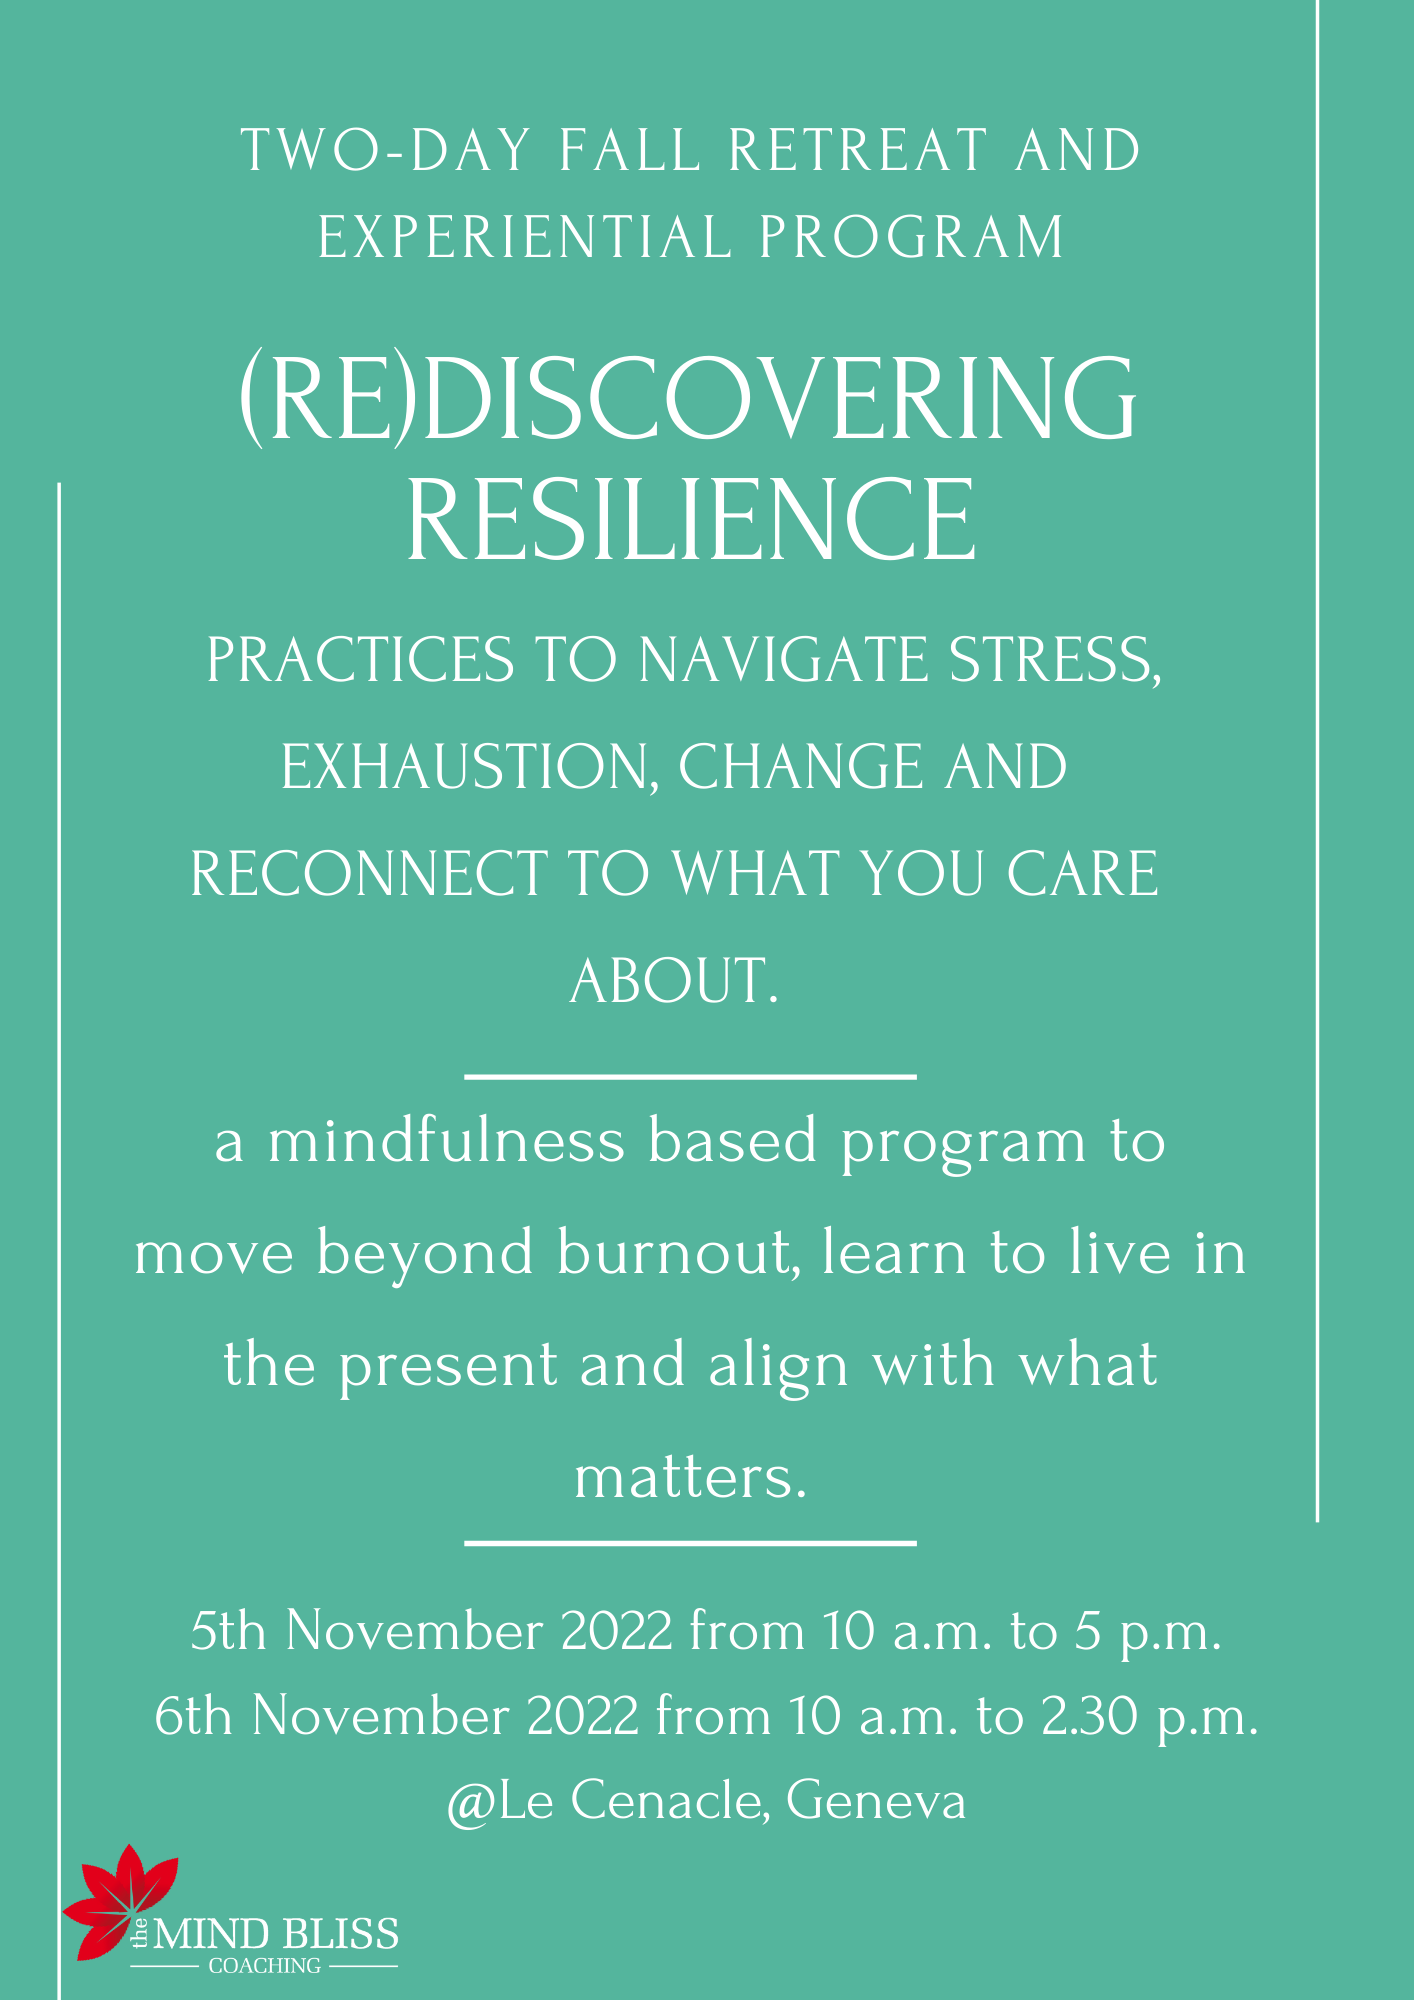 Rediscovering resilience